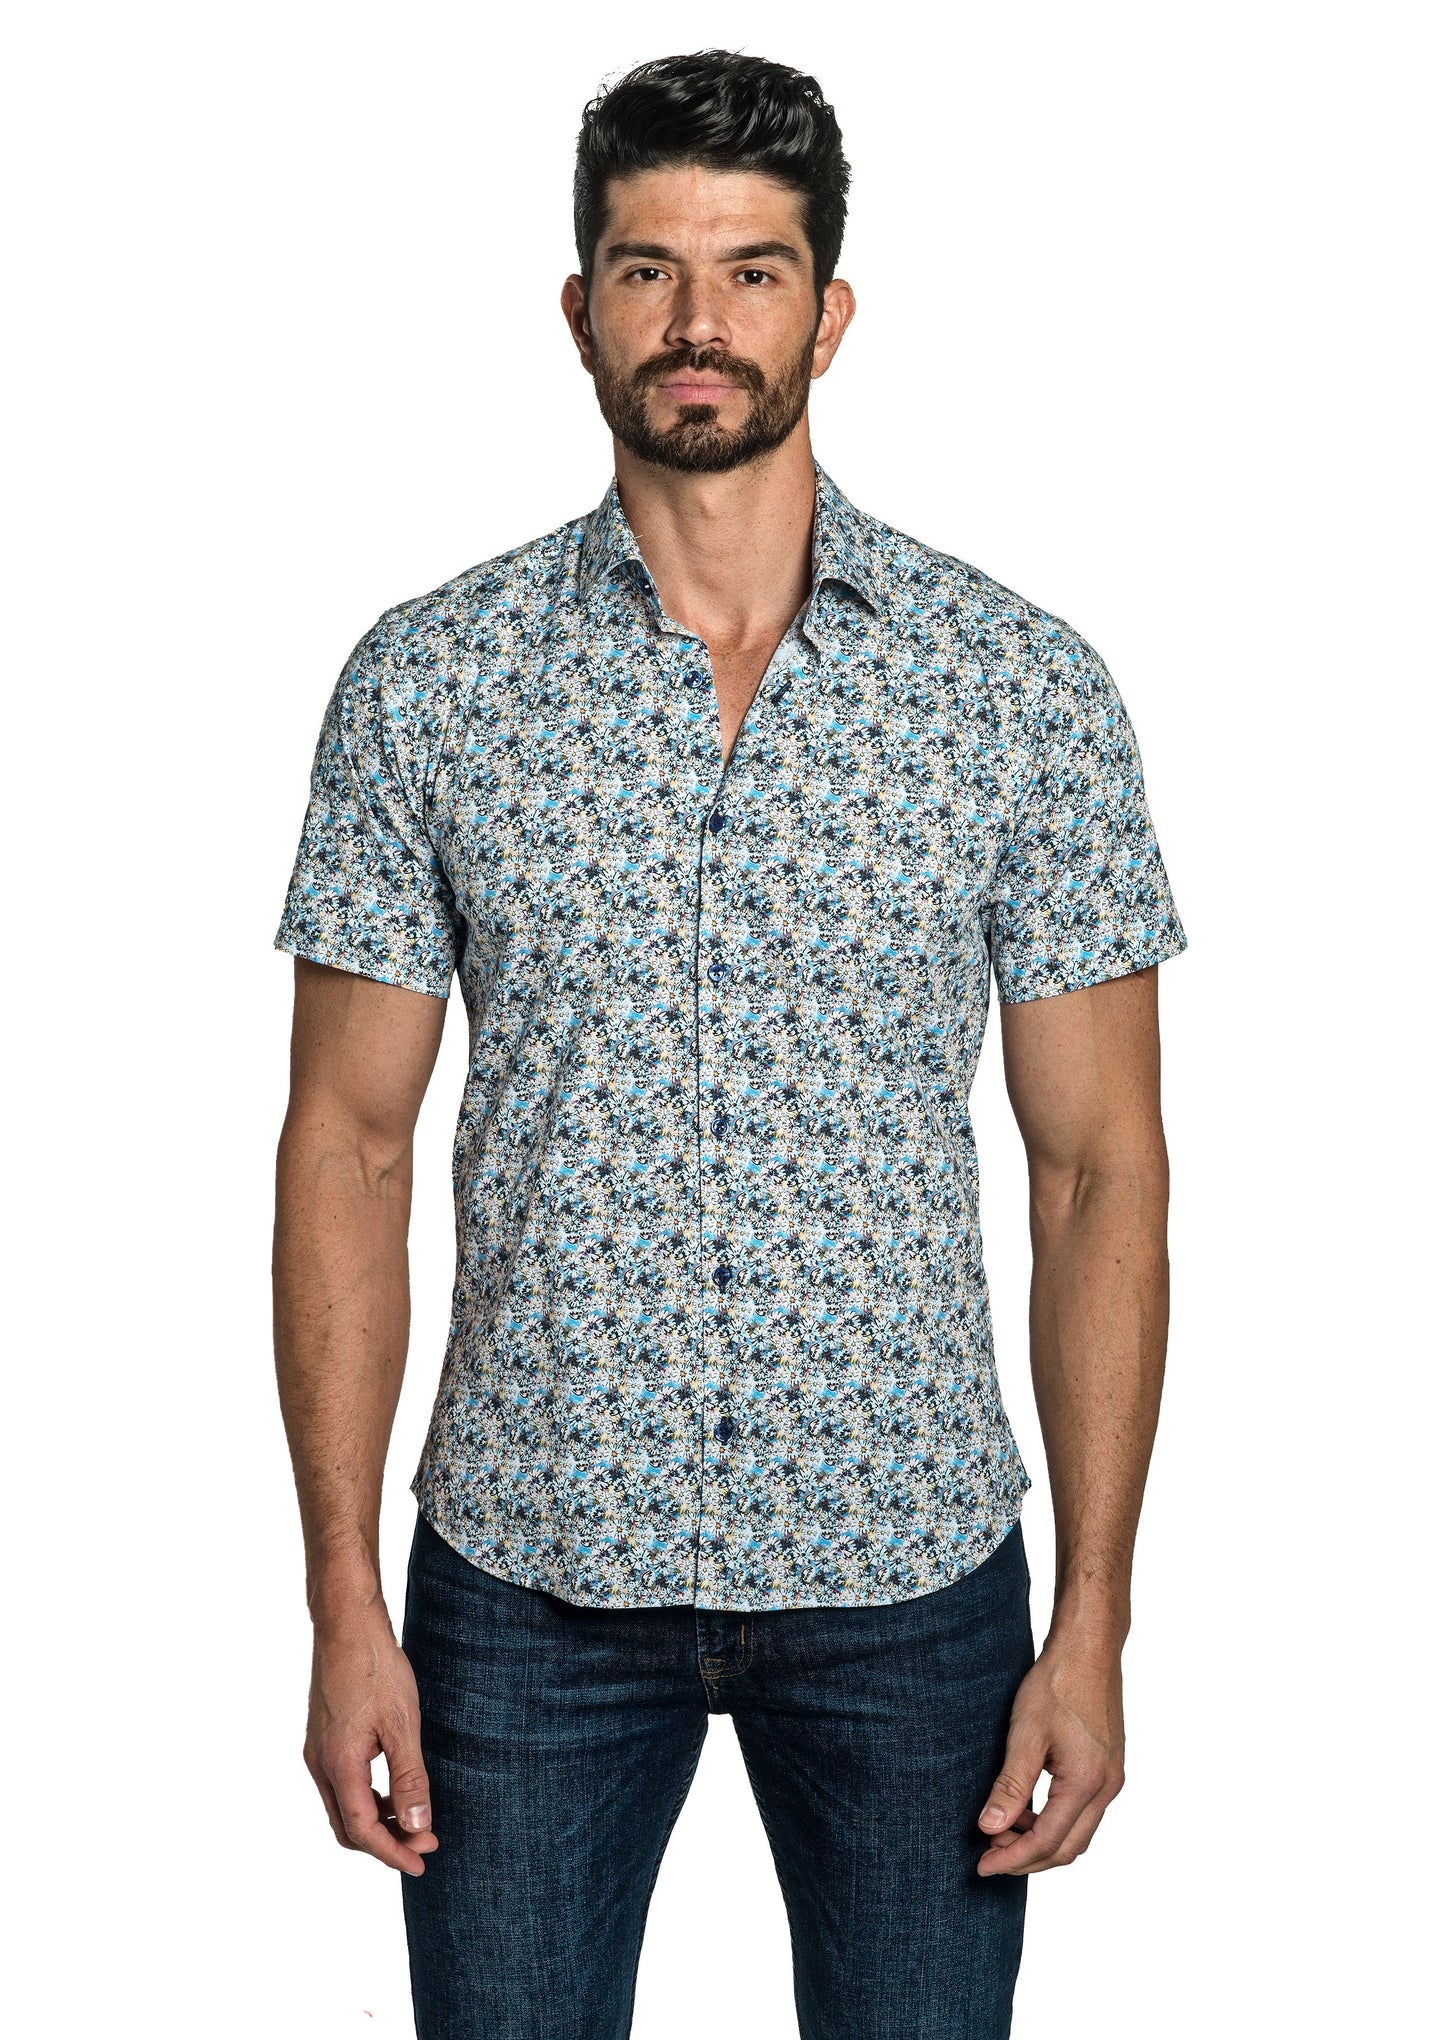 White + Blue Floral Short Sleeve Shirt T-6778SS Front